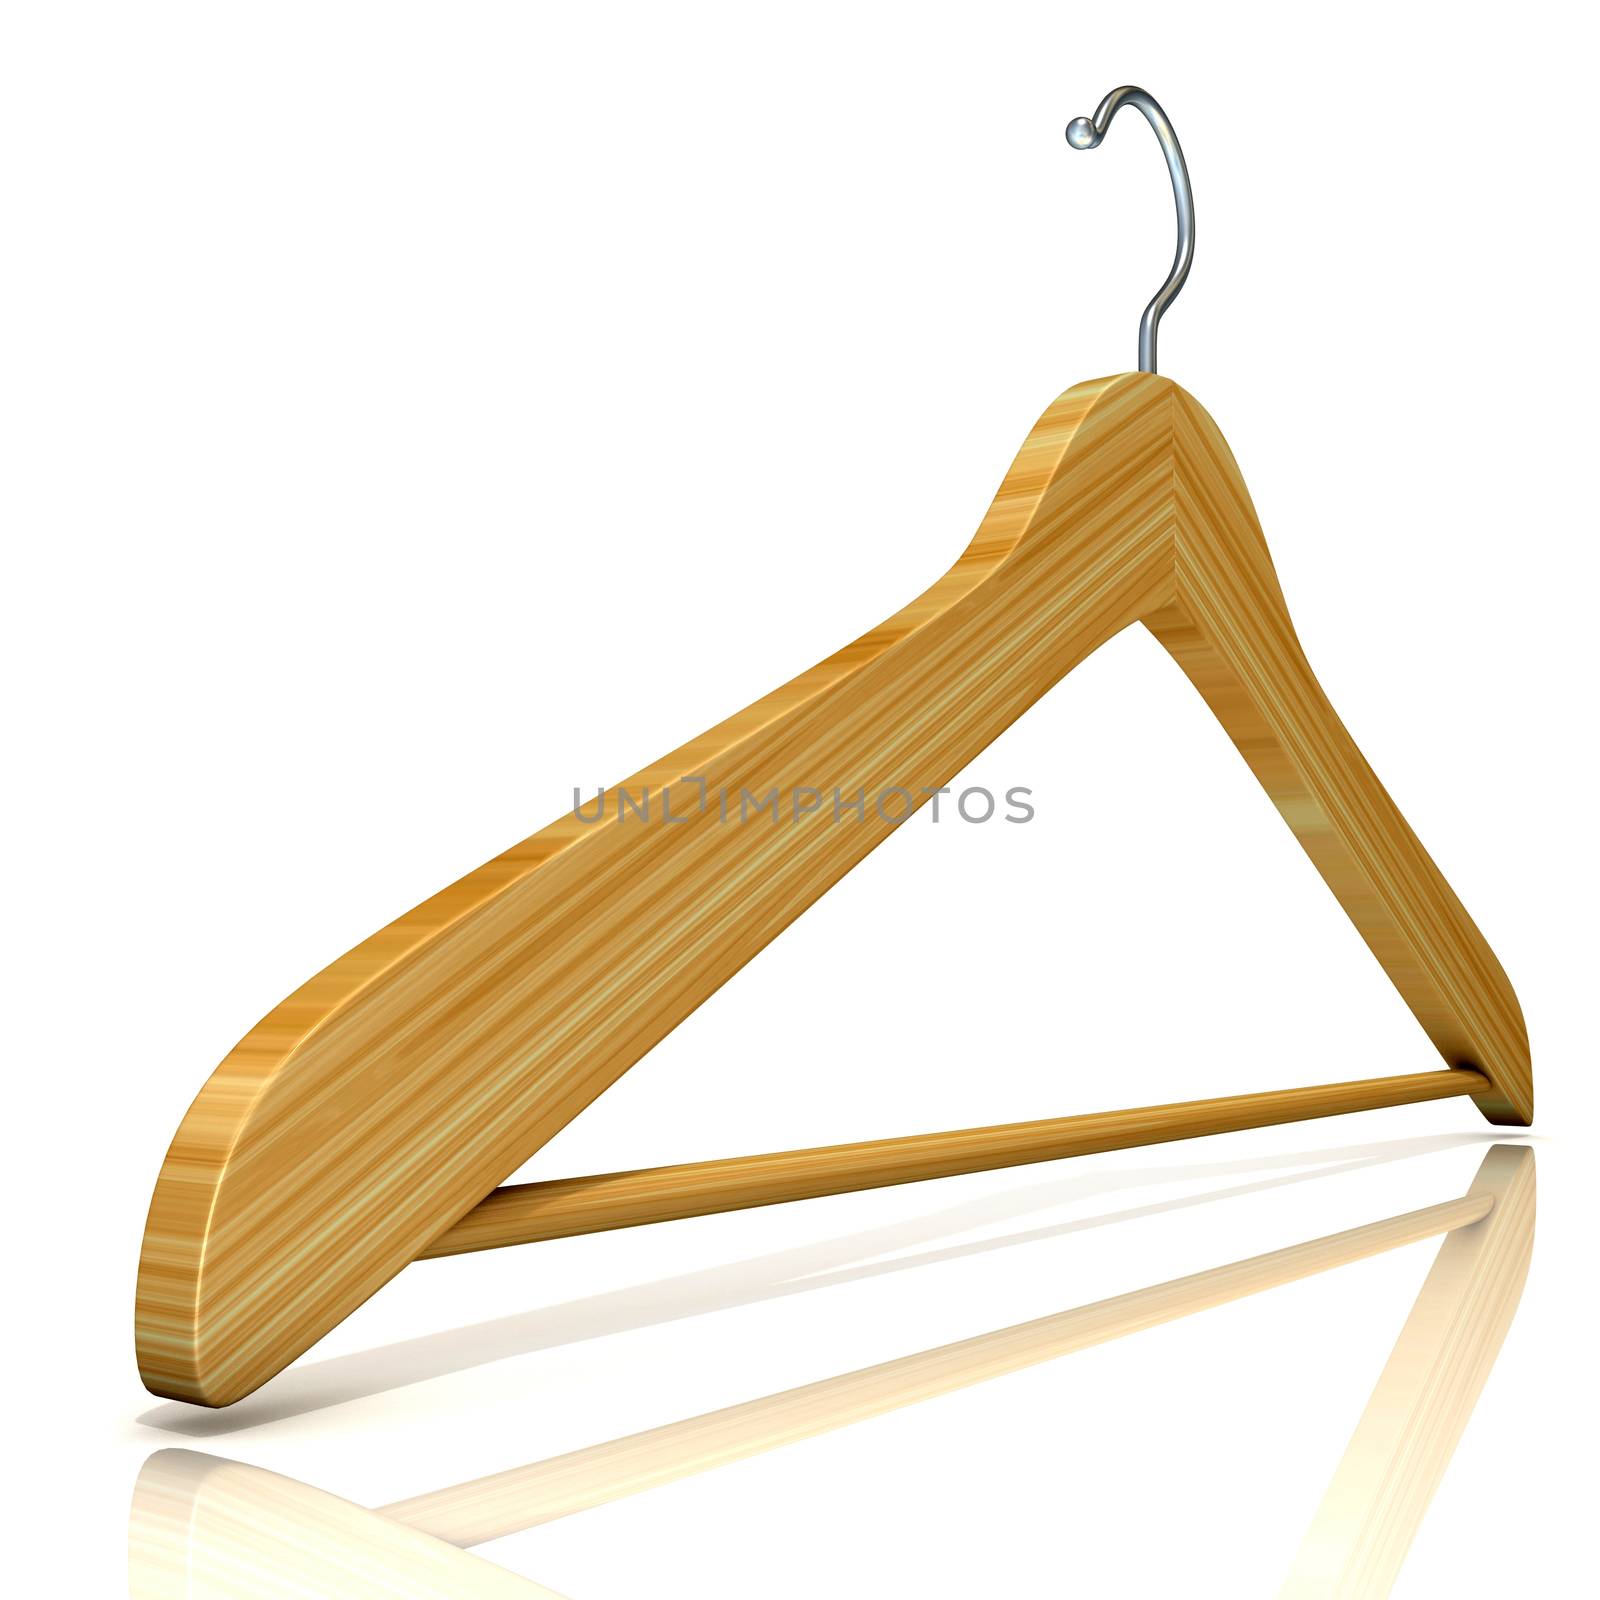 Wooden clothes hangers, 3D by djmilic